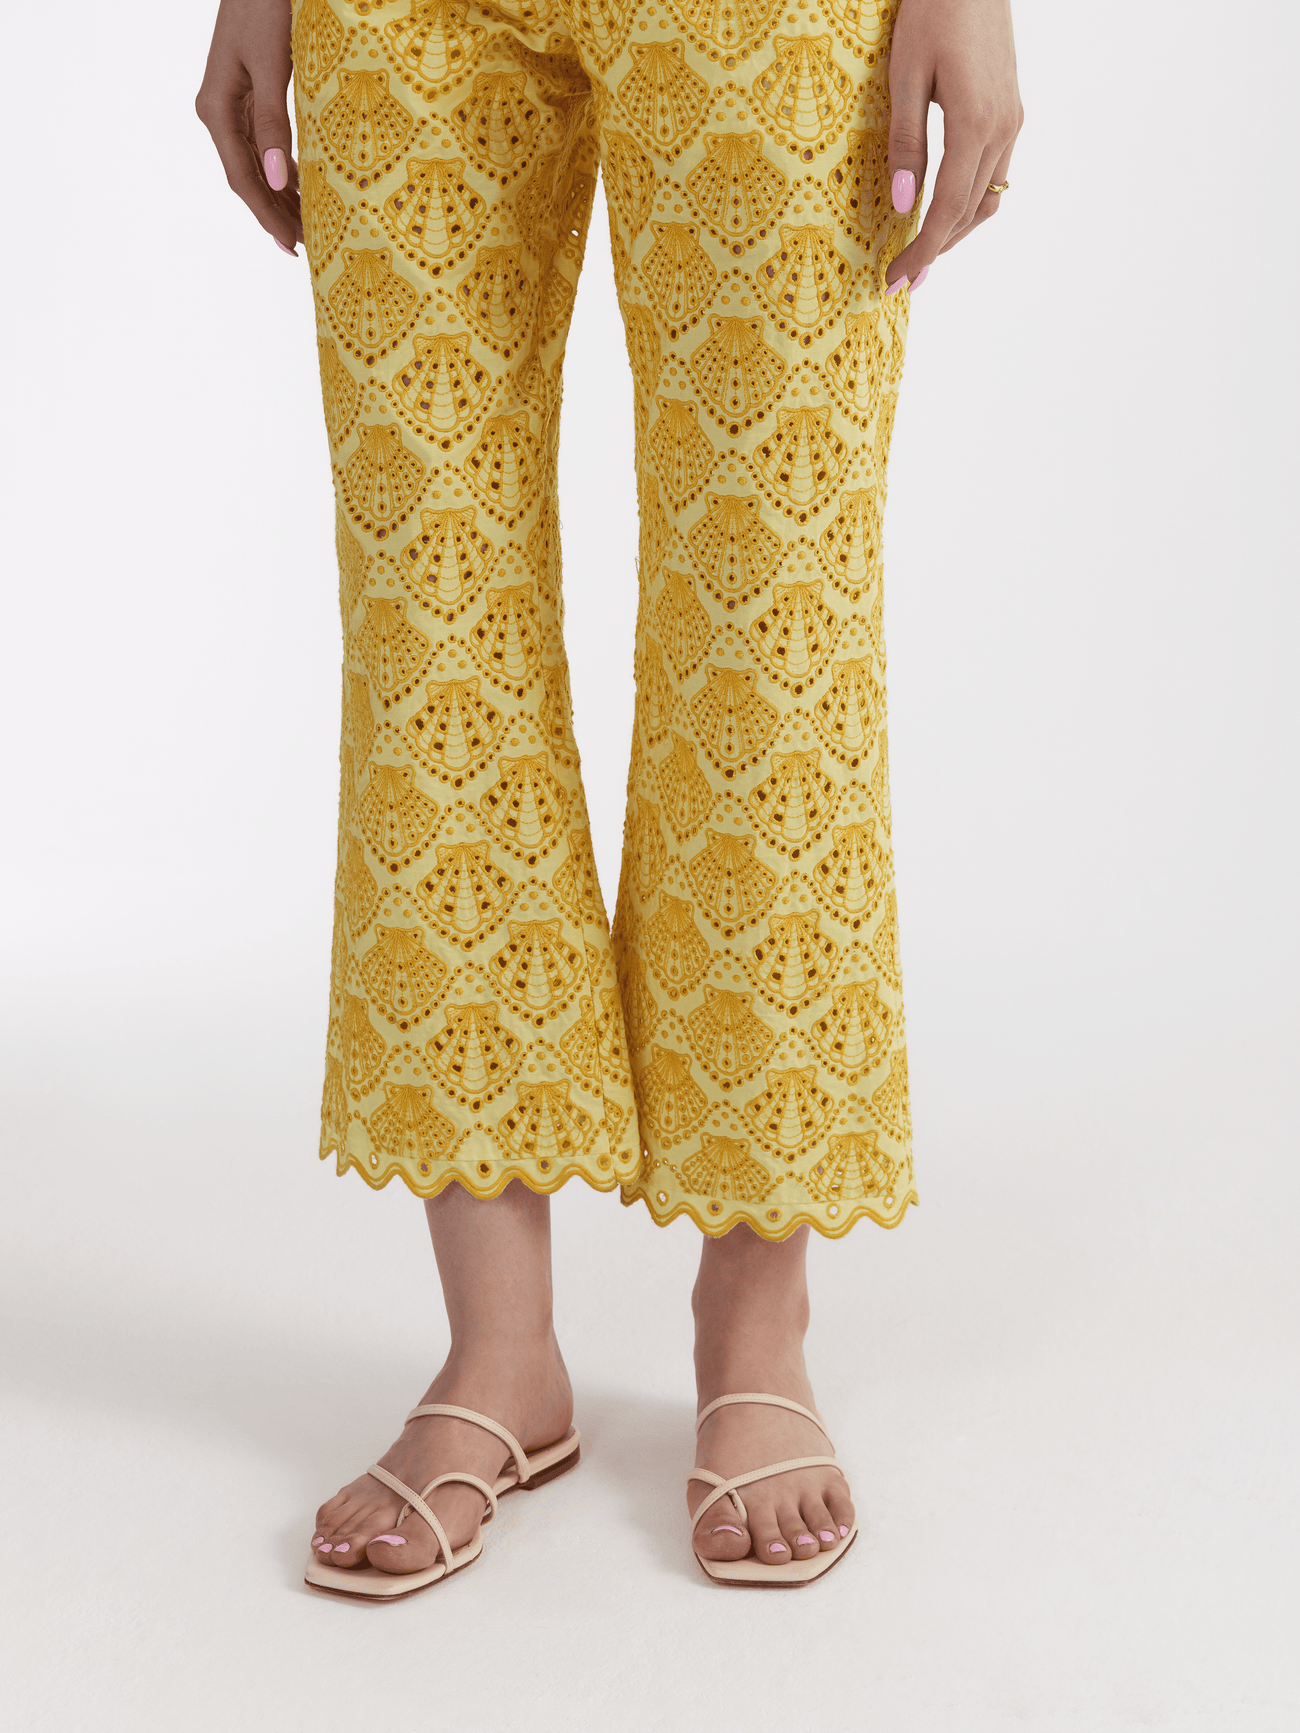 Load image into Gallery viewer, Juli Cotton Jumpsuit in Lemonade Yellow